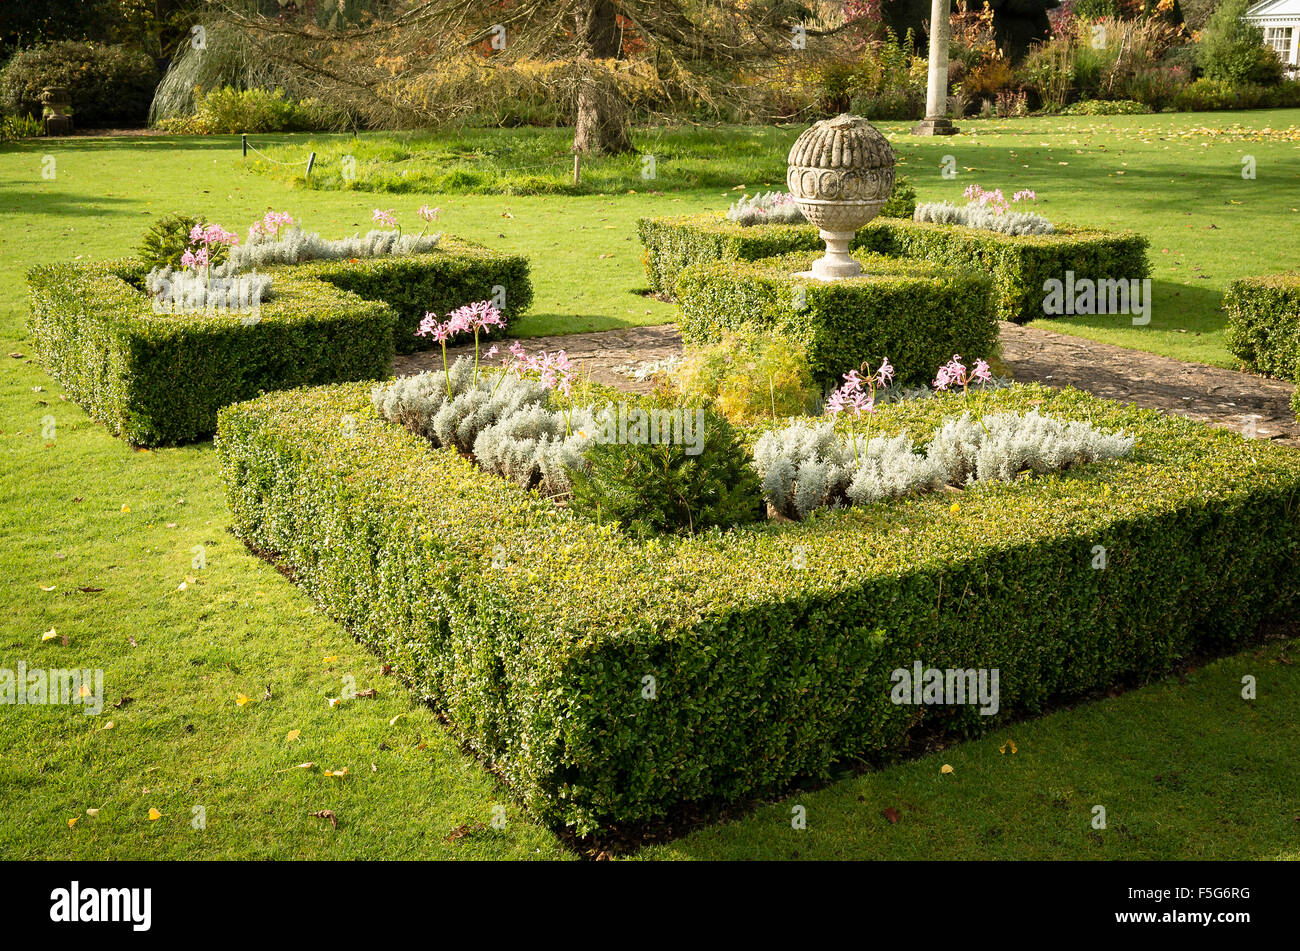 Geometric box-edged beds enclosing seasonal potted plants including nerine Stock Photo